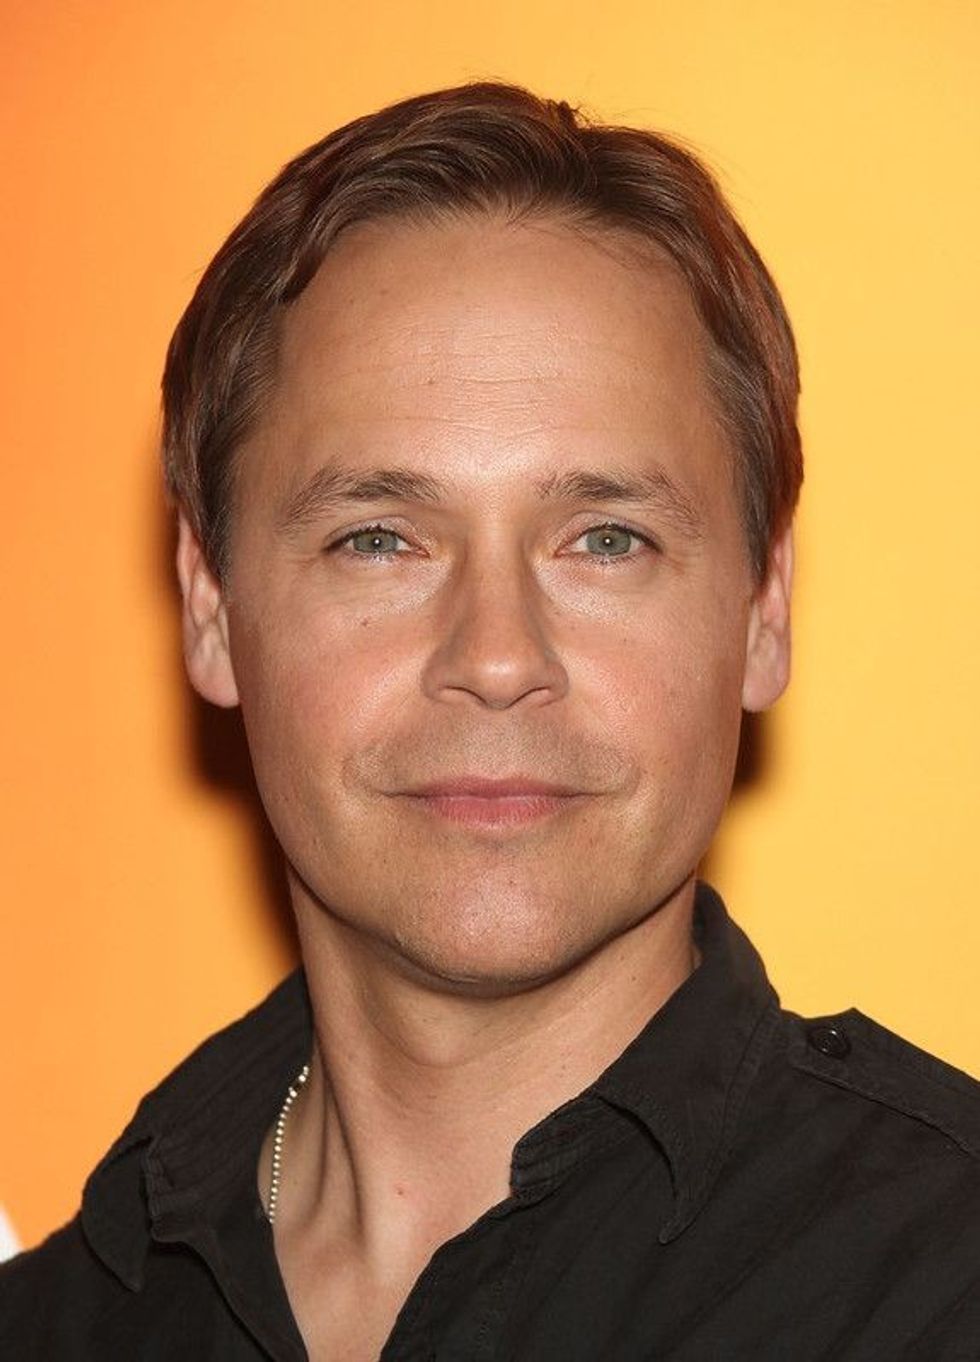 Click here to discover a plethora of amazing facts about Hollywood star Chad Lowe.